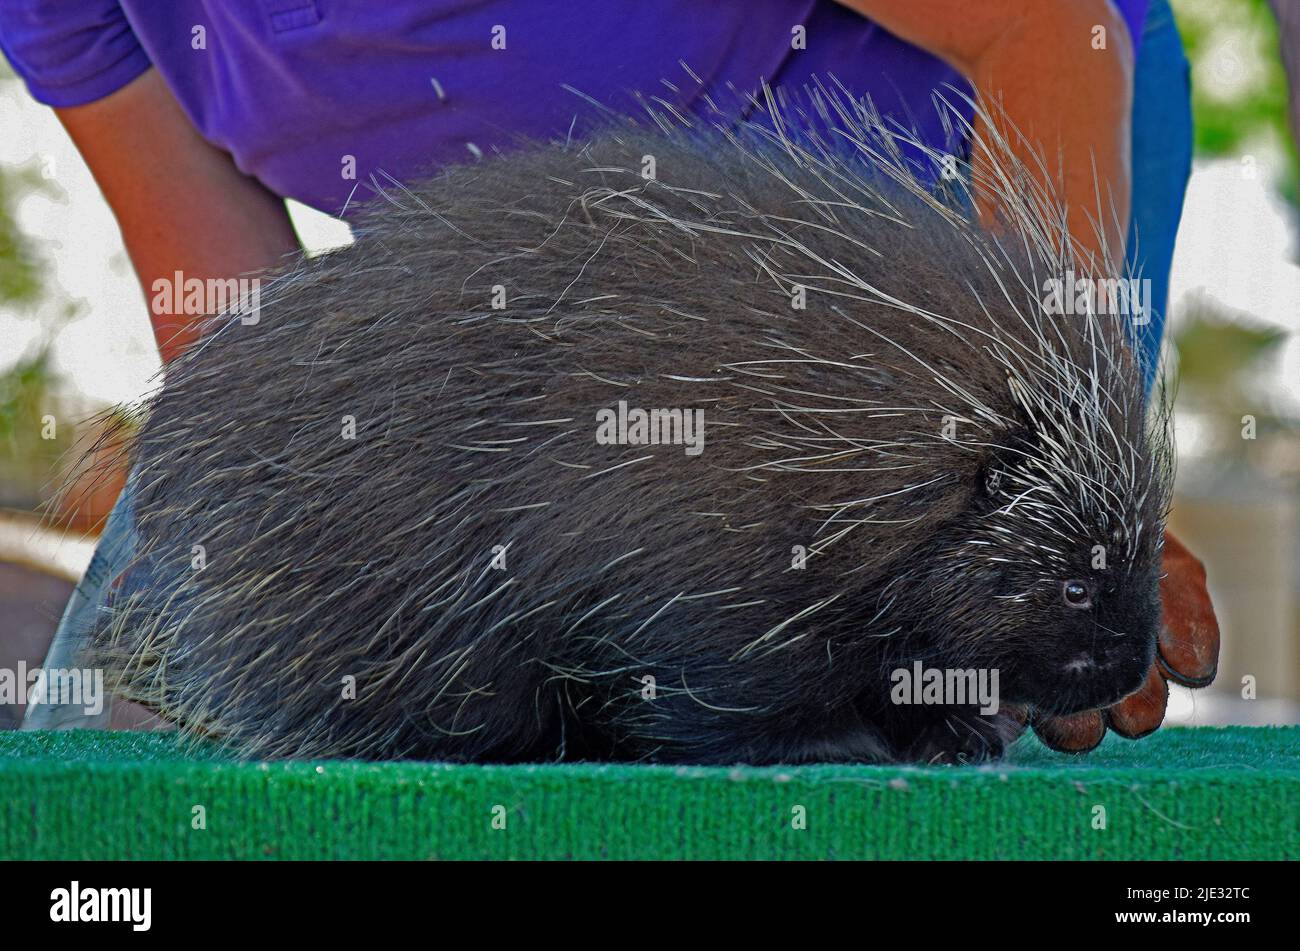 porcupine, Erethizon dorsatum, at a Wildmind science learning education program at the Union City library, California Stock Photo